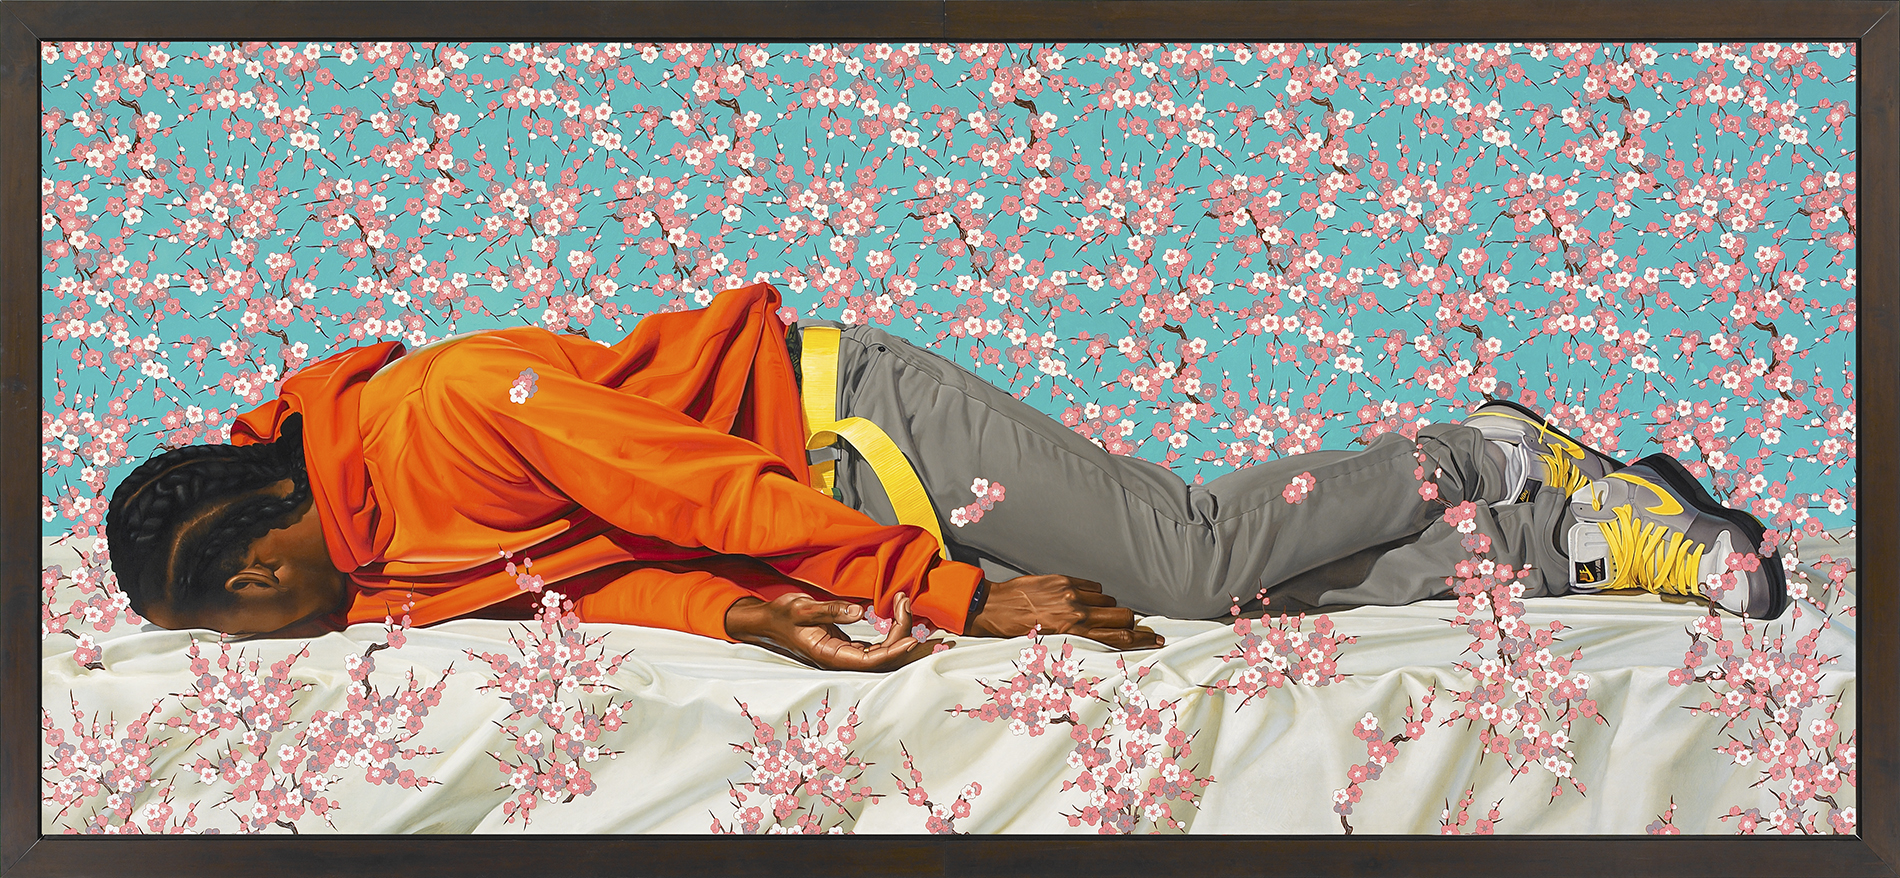 Kehinde Wiley | Down | The Virgin Martyr St. Cecilia, 2008 Oil on Canvas. | 3